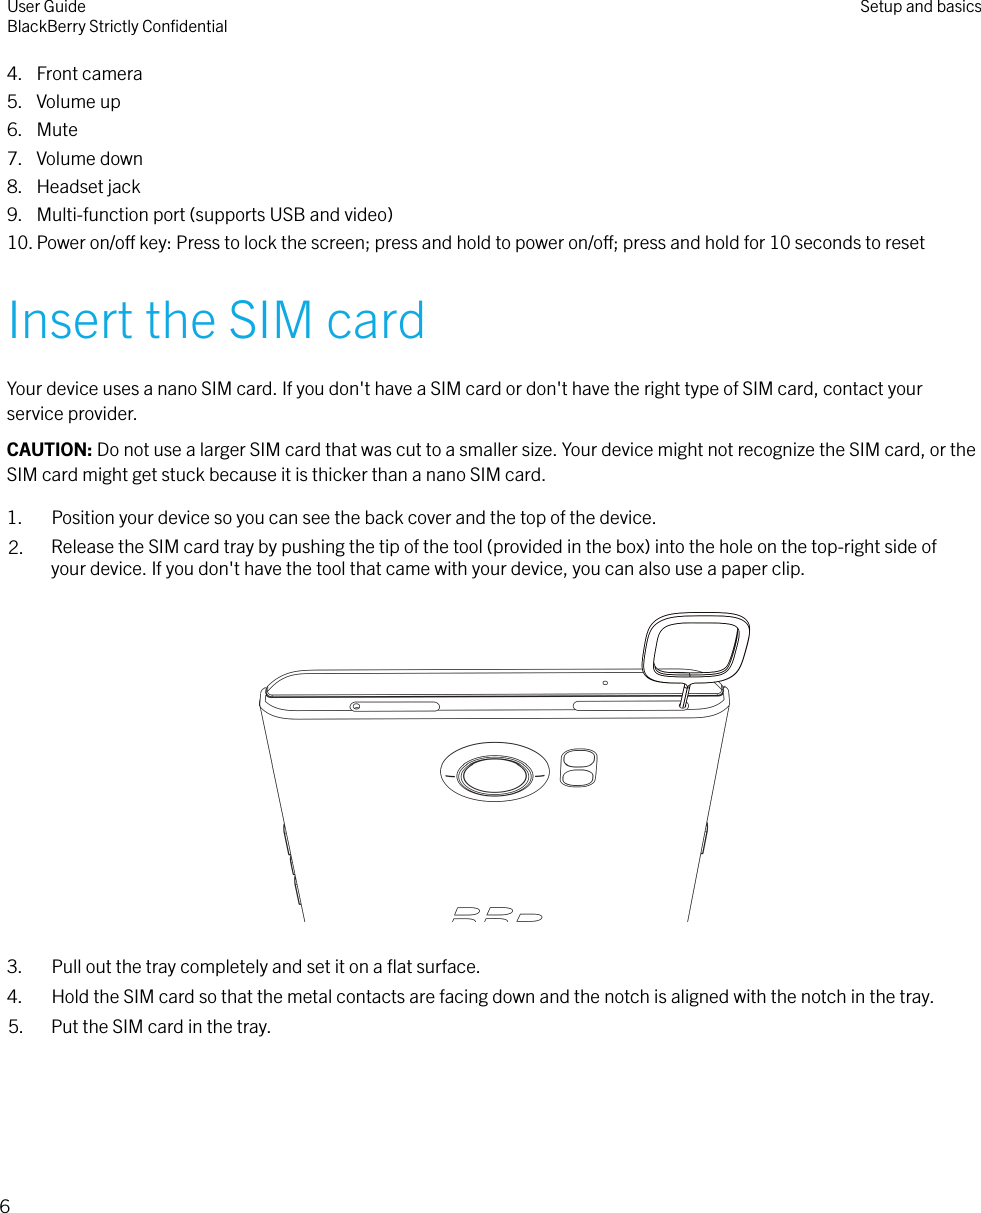 4. Front camera5. Volume up6. Mute7. Volume down8. Headset jack9. Multi-function port (supports USB and video)10. Power on/o key: Press to lock the screen; press and hold to power on/o; press and hold for 10 seconds to resetInsert the SIM cardYour device uses a nano SIM card. If you don&apos;t have a SIM card or don&apos;t have the right type of SIM card, contact yourservice provider.CAUTION: Do not use a larger SIM card that was cut to a smaller size. Your device might not recognize the SIM card, or theSIM card might get stuck because it is thicker than a nano SIM card.1. Position your device so you can see the back cover and the top of the device.2. Release the SIM card tray by pushing the tip of the tool (provided in the box) into the hole on the top-right side ofyour device. If you don&apos;t have the tool that came with your device, you can also use a paper clip.  3. Pull out the tray completely and set it on a ﬂat surface.4. Hold the SIM card so that the metal contacts are facing down and the notch is aligned with the notch in the tray.5. Put the SIM card in the tray. User GuideBlackBerry Strictly ConﬁdentialSetup and basics6